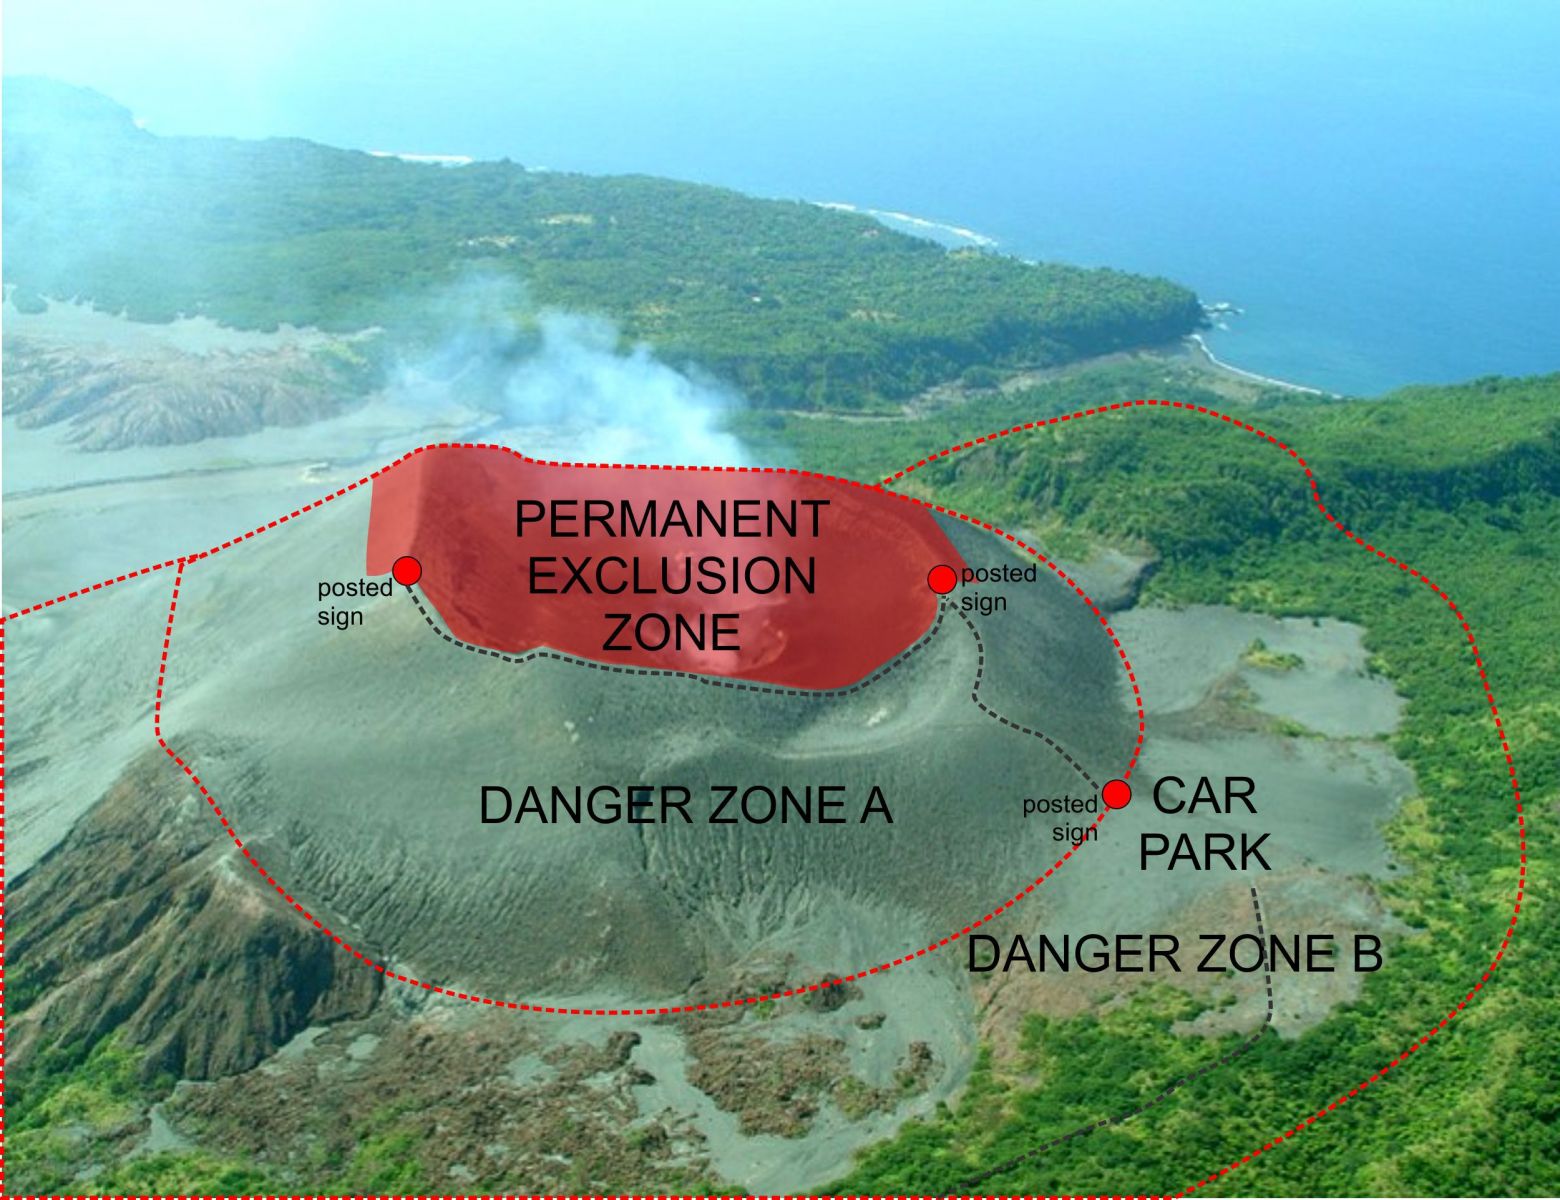 Aerial view of the Yasur volcano with the exclusion zone and car park. Image credit: Geohazards